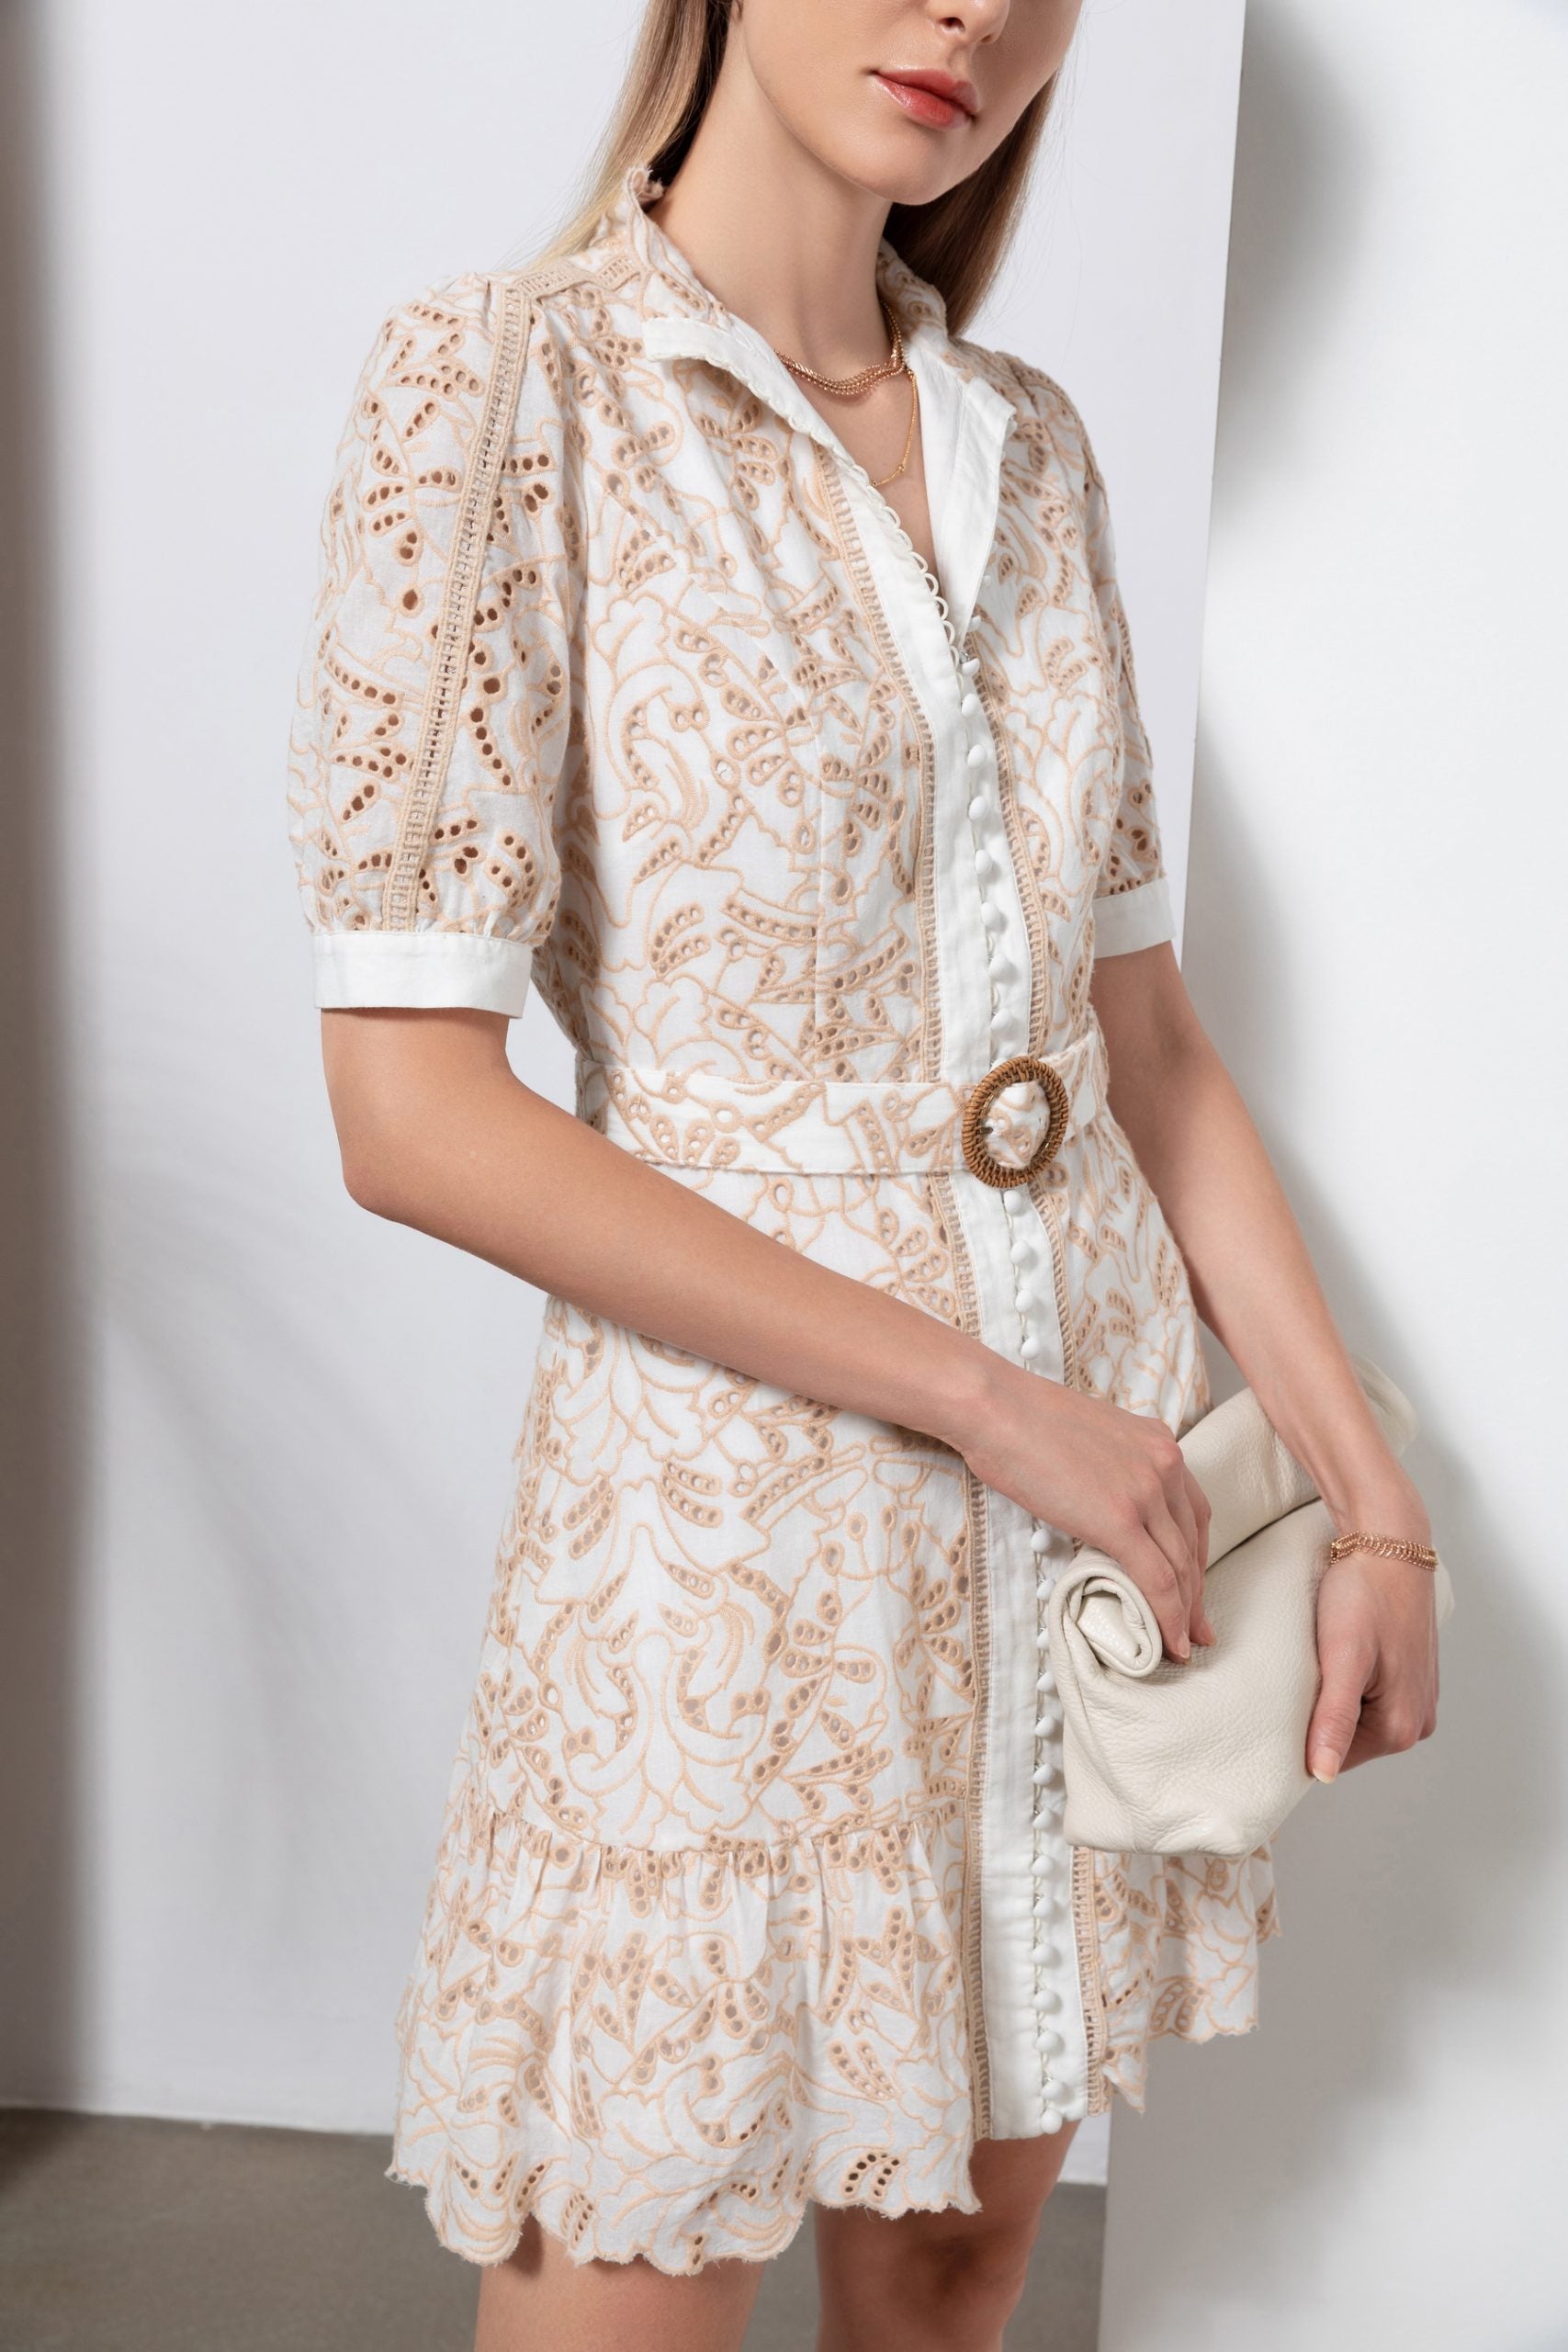 Discover timeless elegance in our embroidered cotton white dress. Perfect for any occasion. Order yours today!